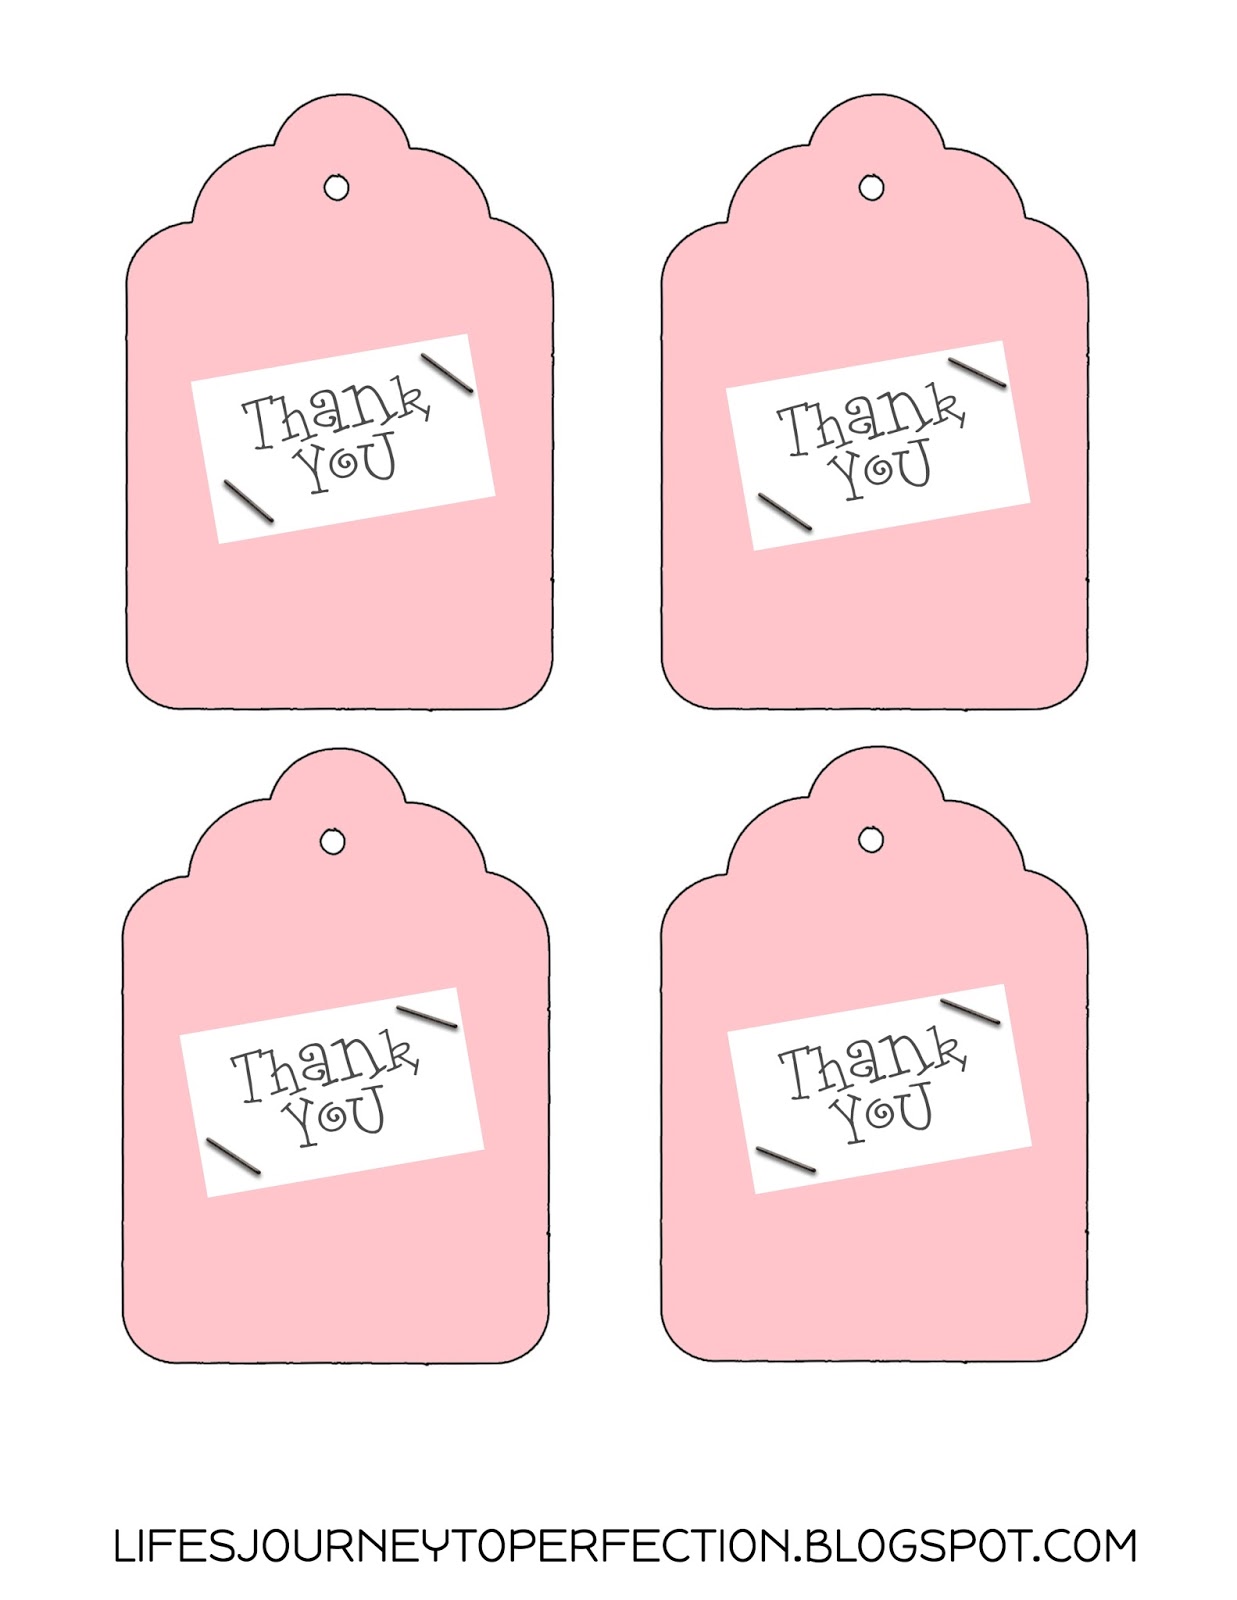 Life's Journey To Perfection: Thank You Gift Idea and Free Tags Printable